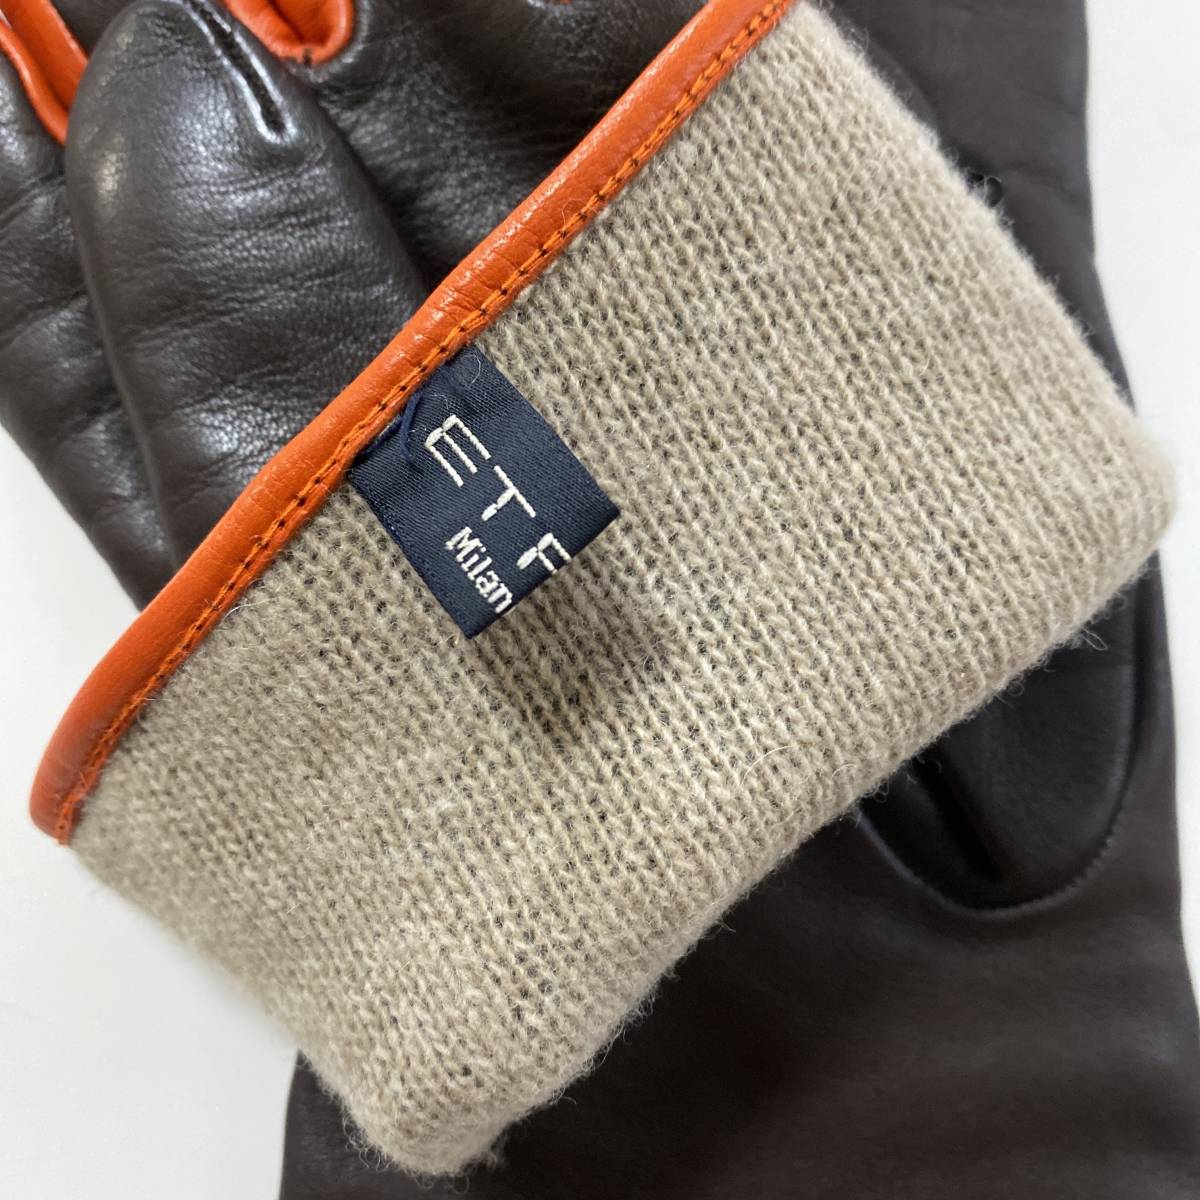 [ beautiful goods ] Italy made ETRO Etro lady's leather glove leather gloves Brown × orange lining attaching 